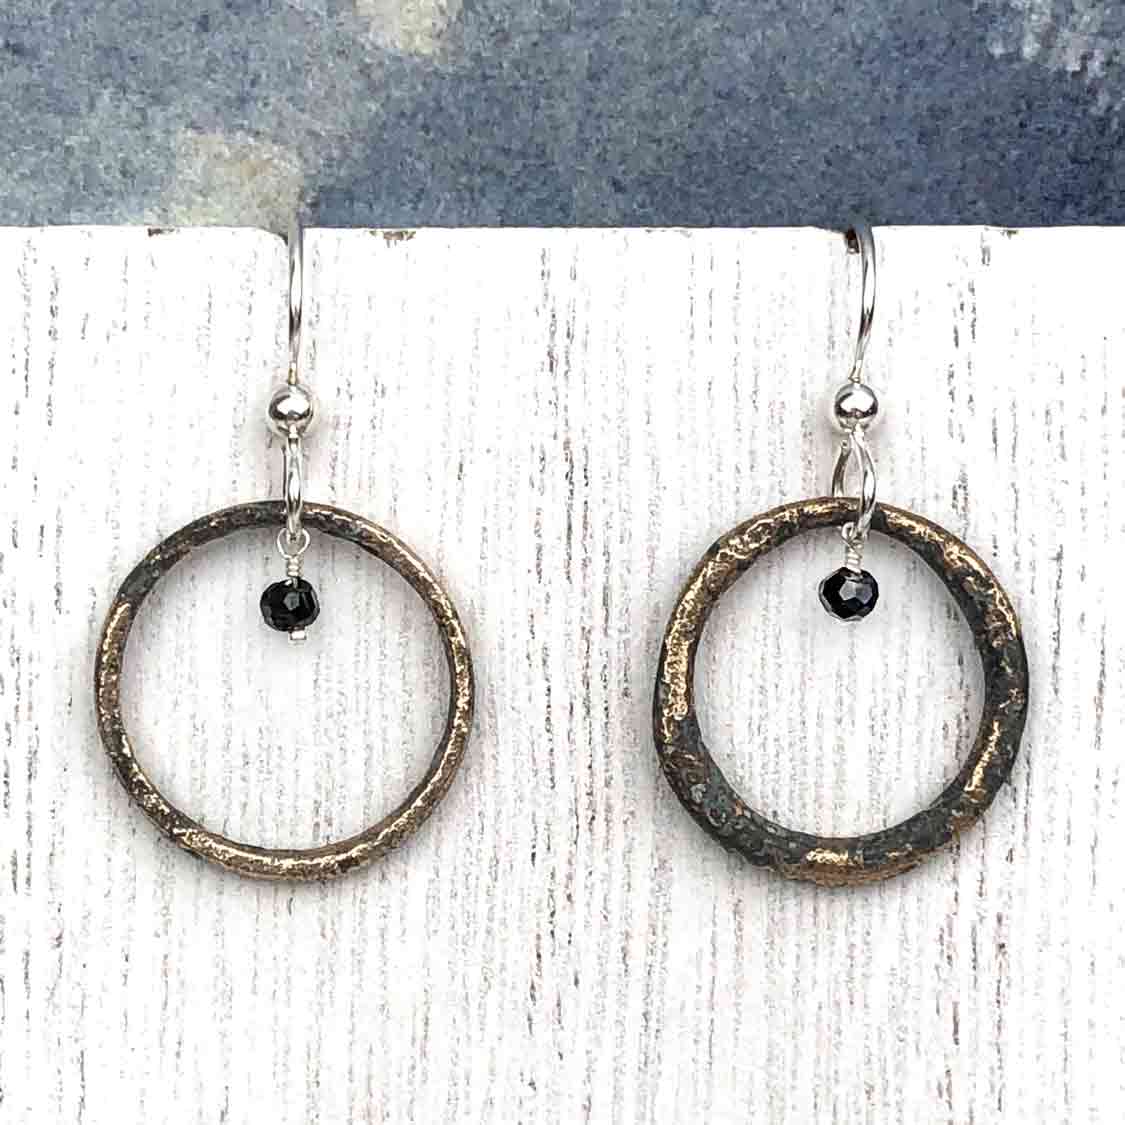 Dark Charcoal Flecked Bronze Celtic Ring Money Earrings with Genuine Blue Sapphire